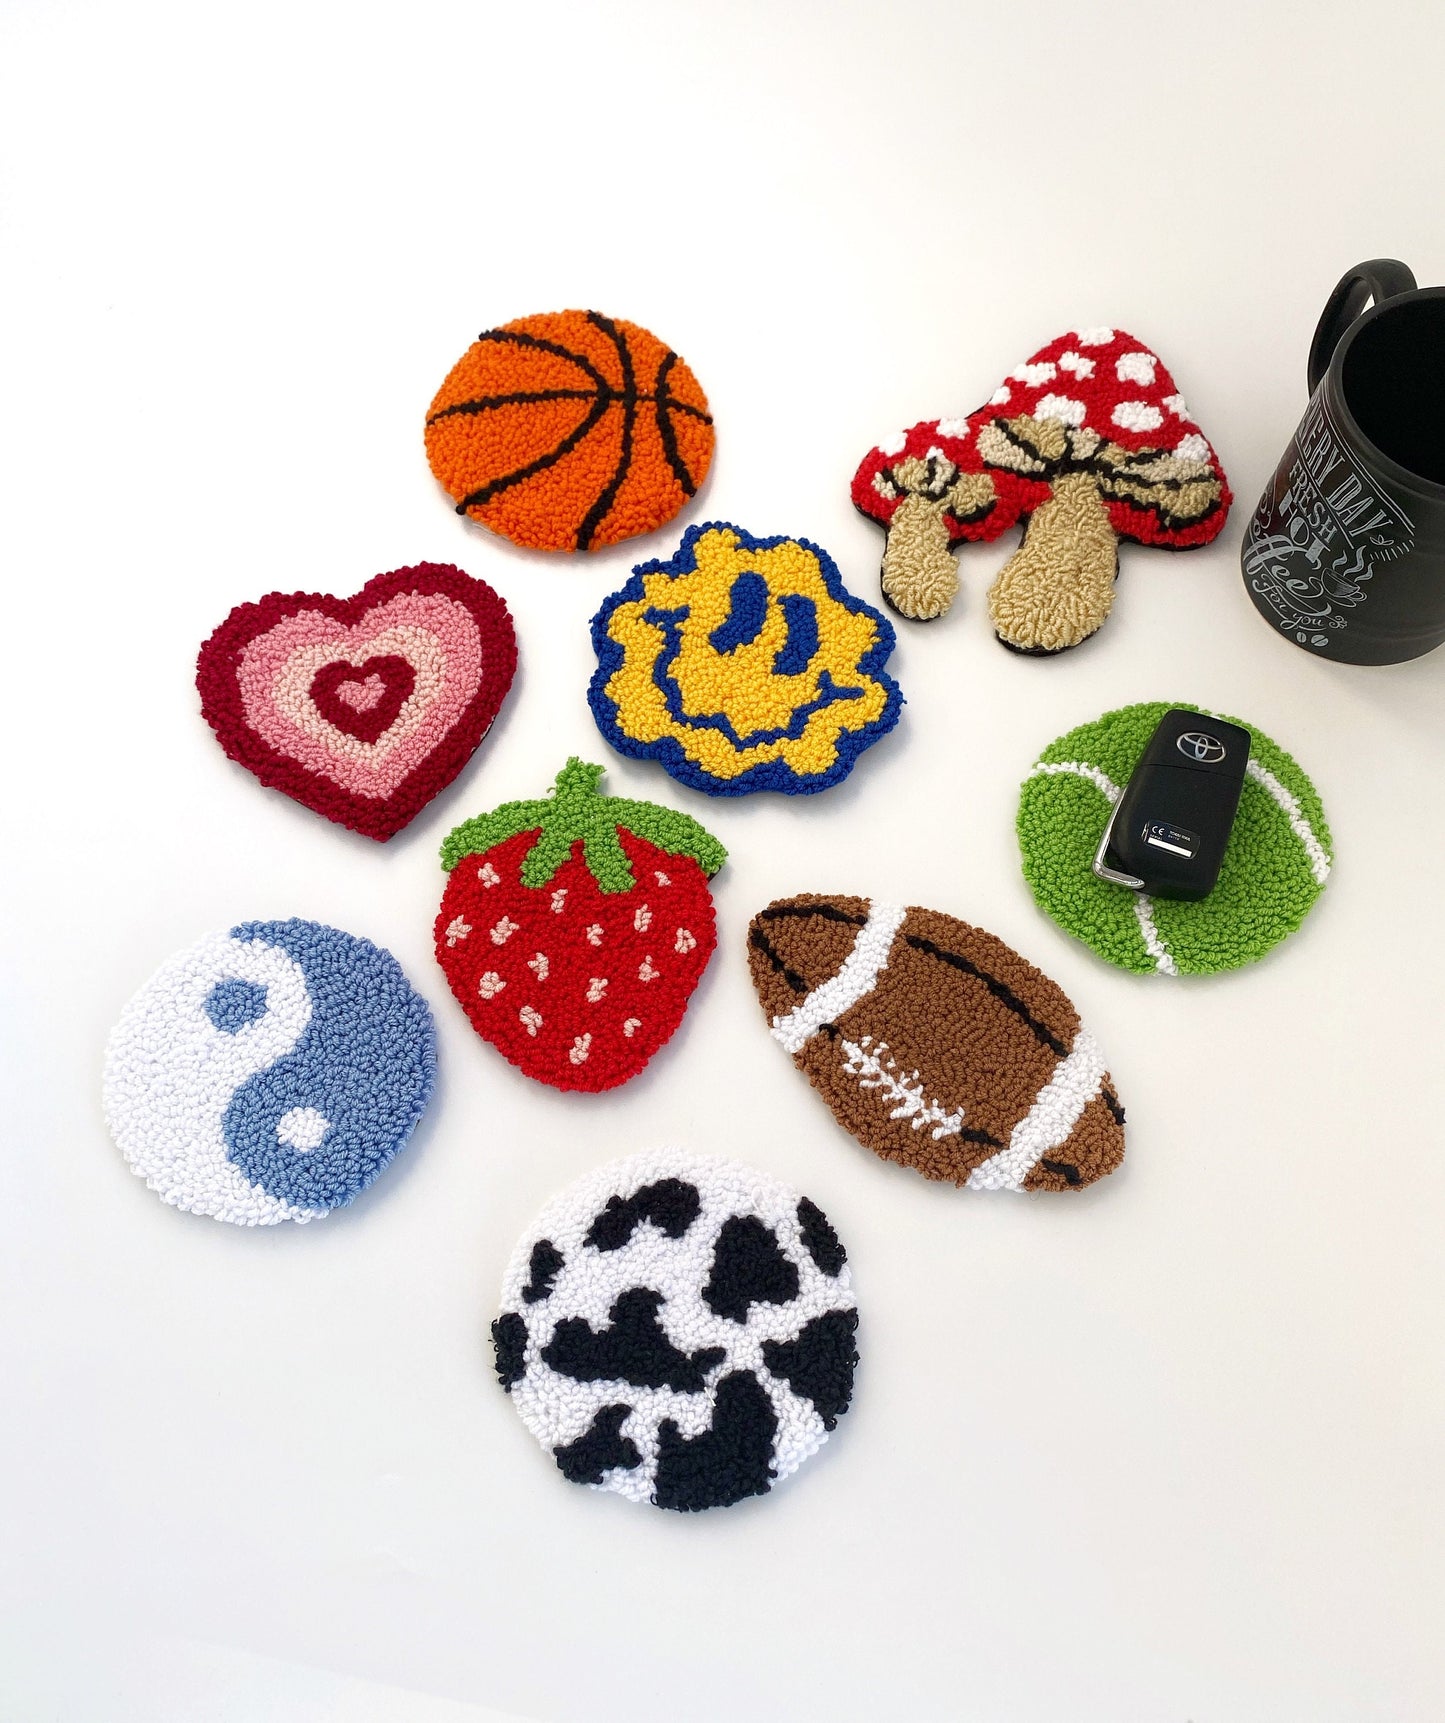 Customizable Hand Tufted Punch Needle Coasters